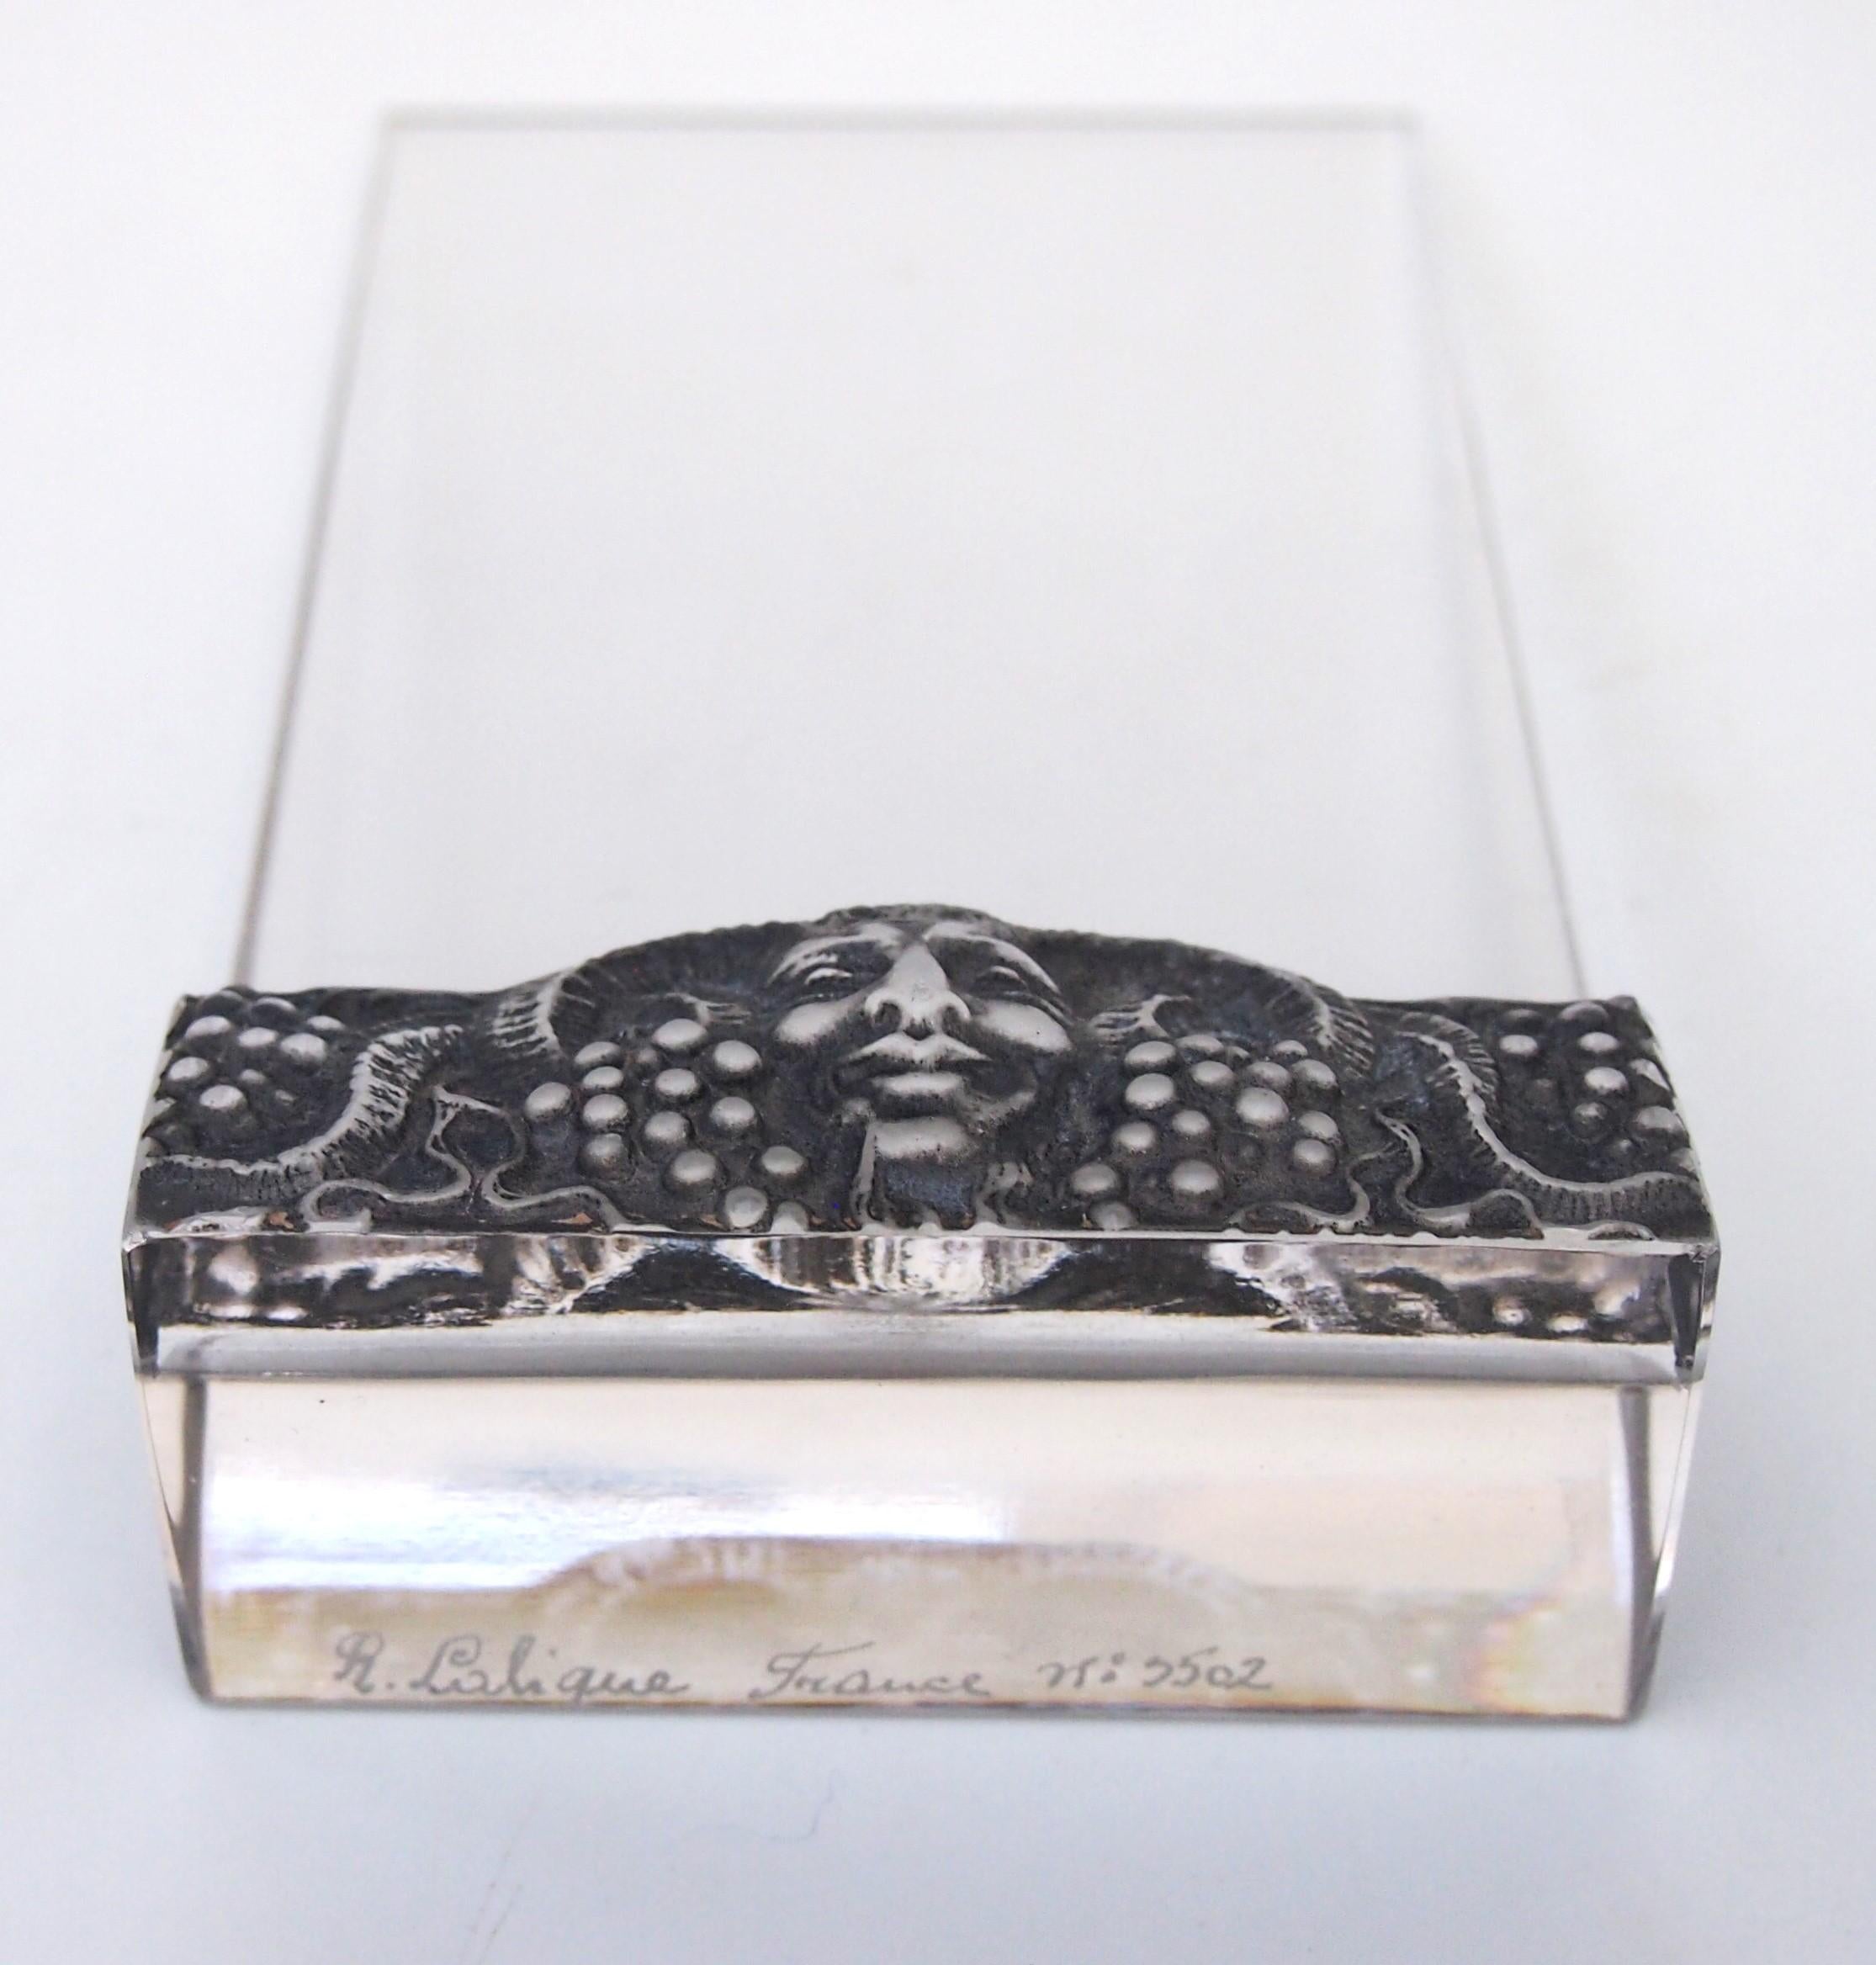 Rare Rene Lalique, Signed, original grey stained Glass Faune Menu Holder c1928 For Sale 2